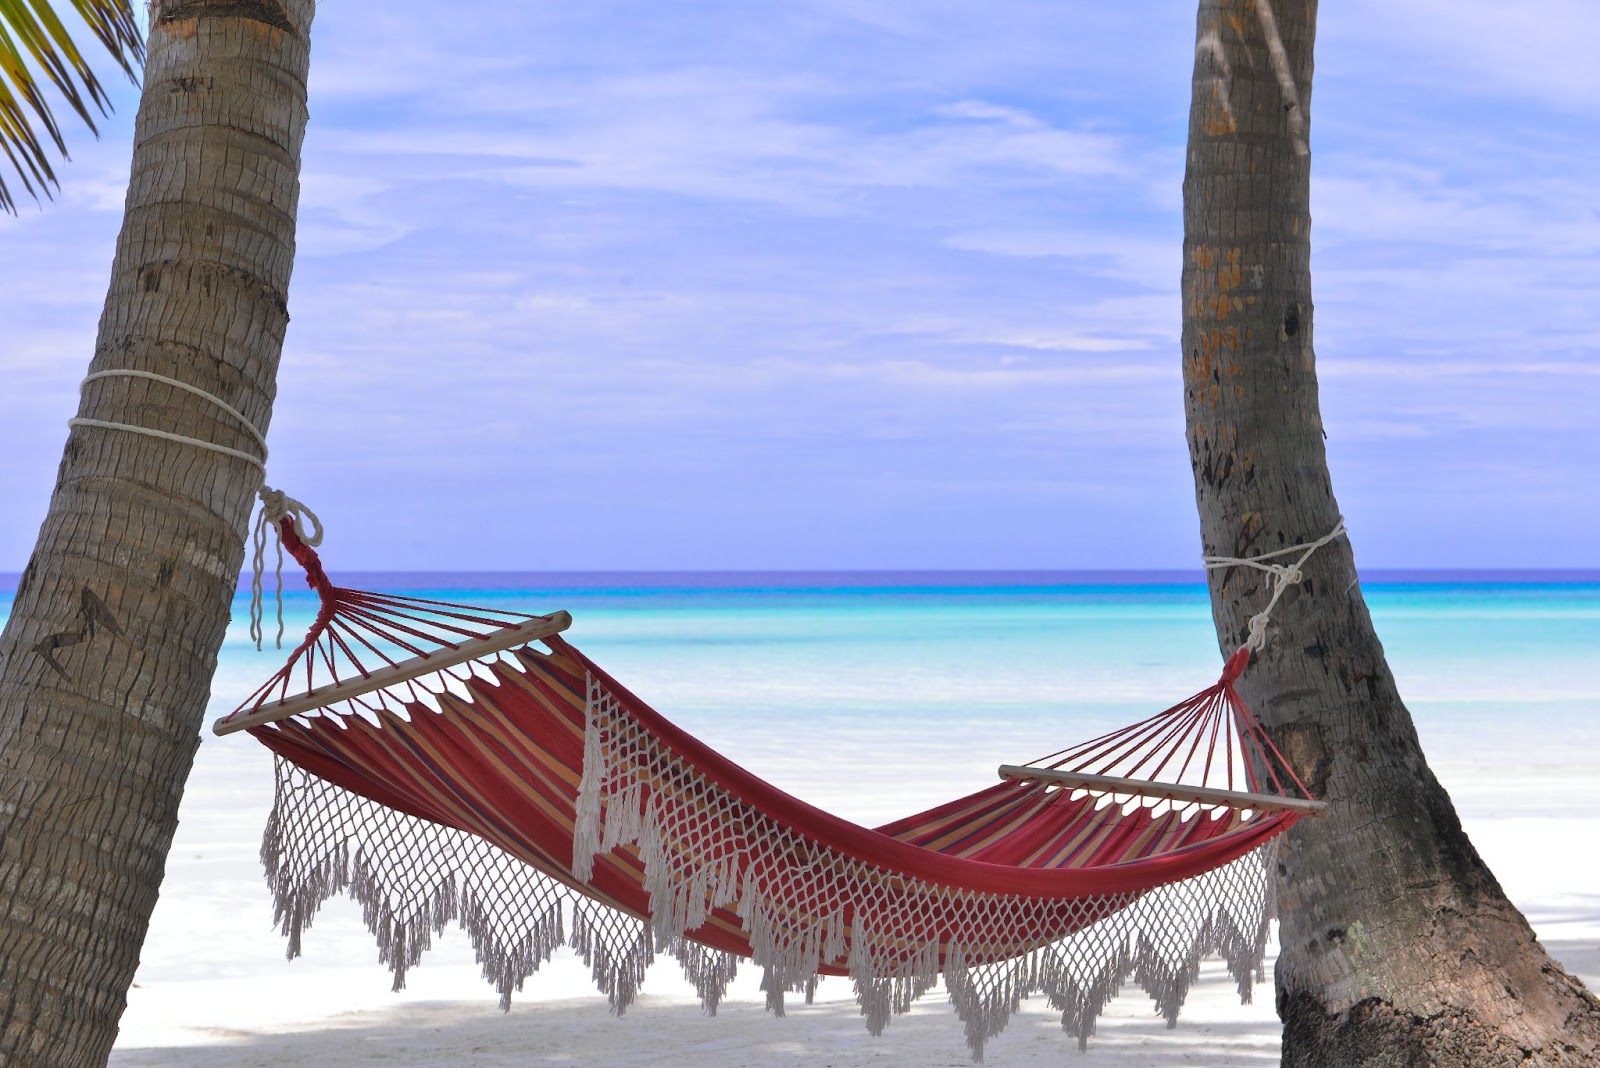 A hammock in Barbados makes for a nice break on your family holiday!